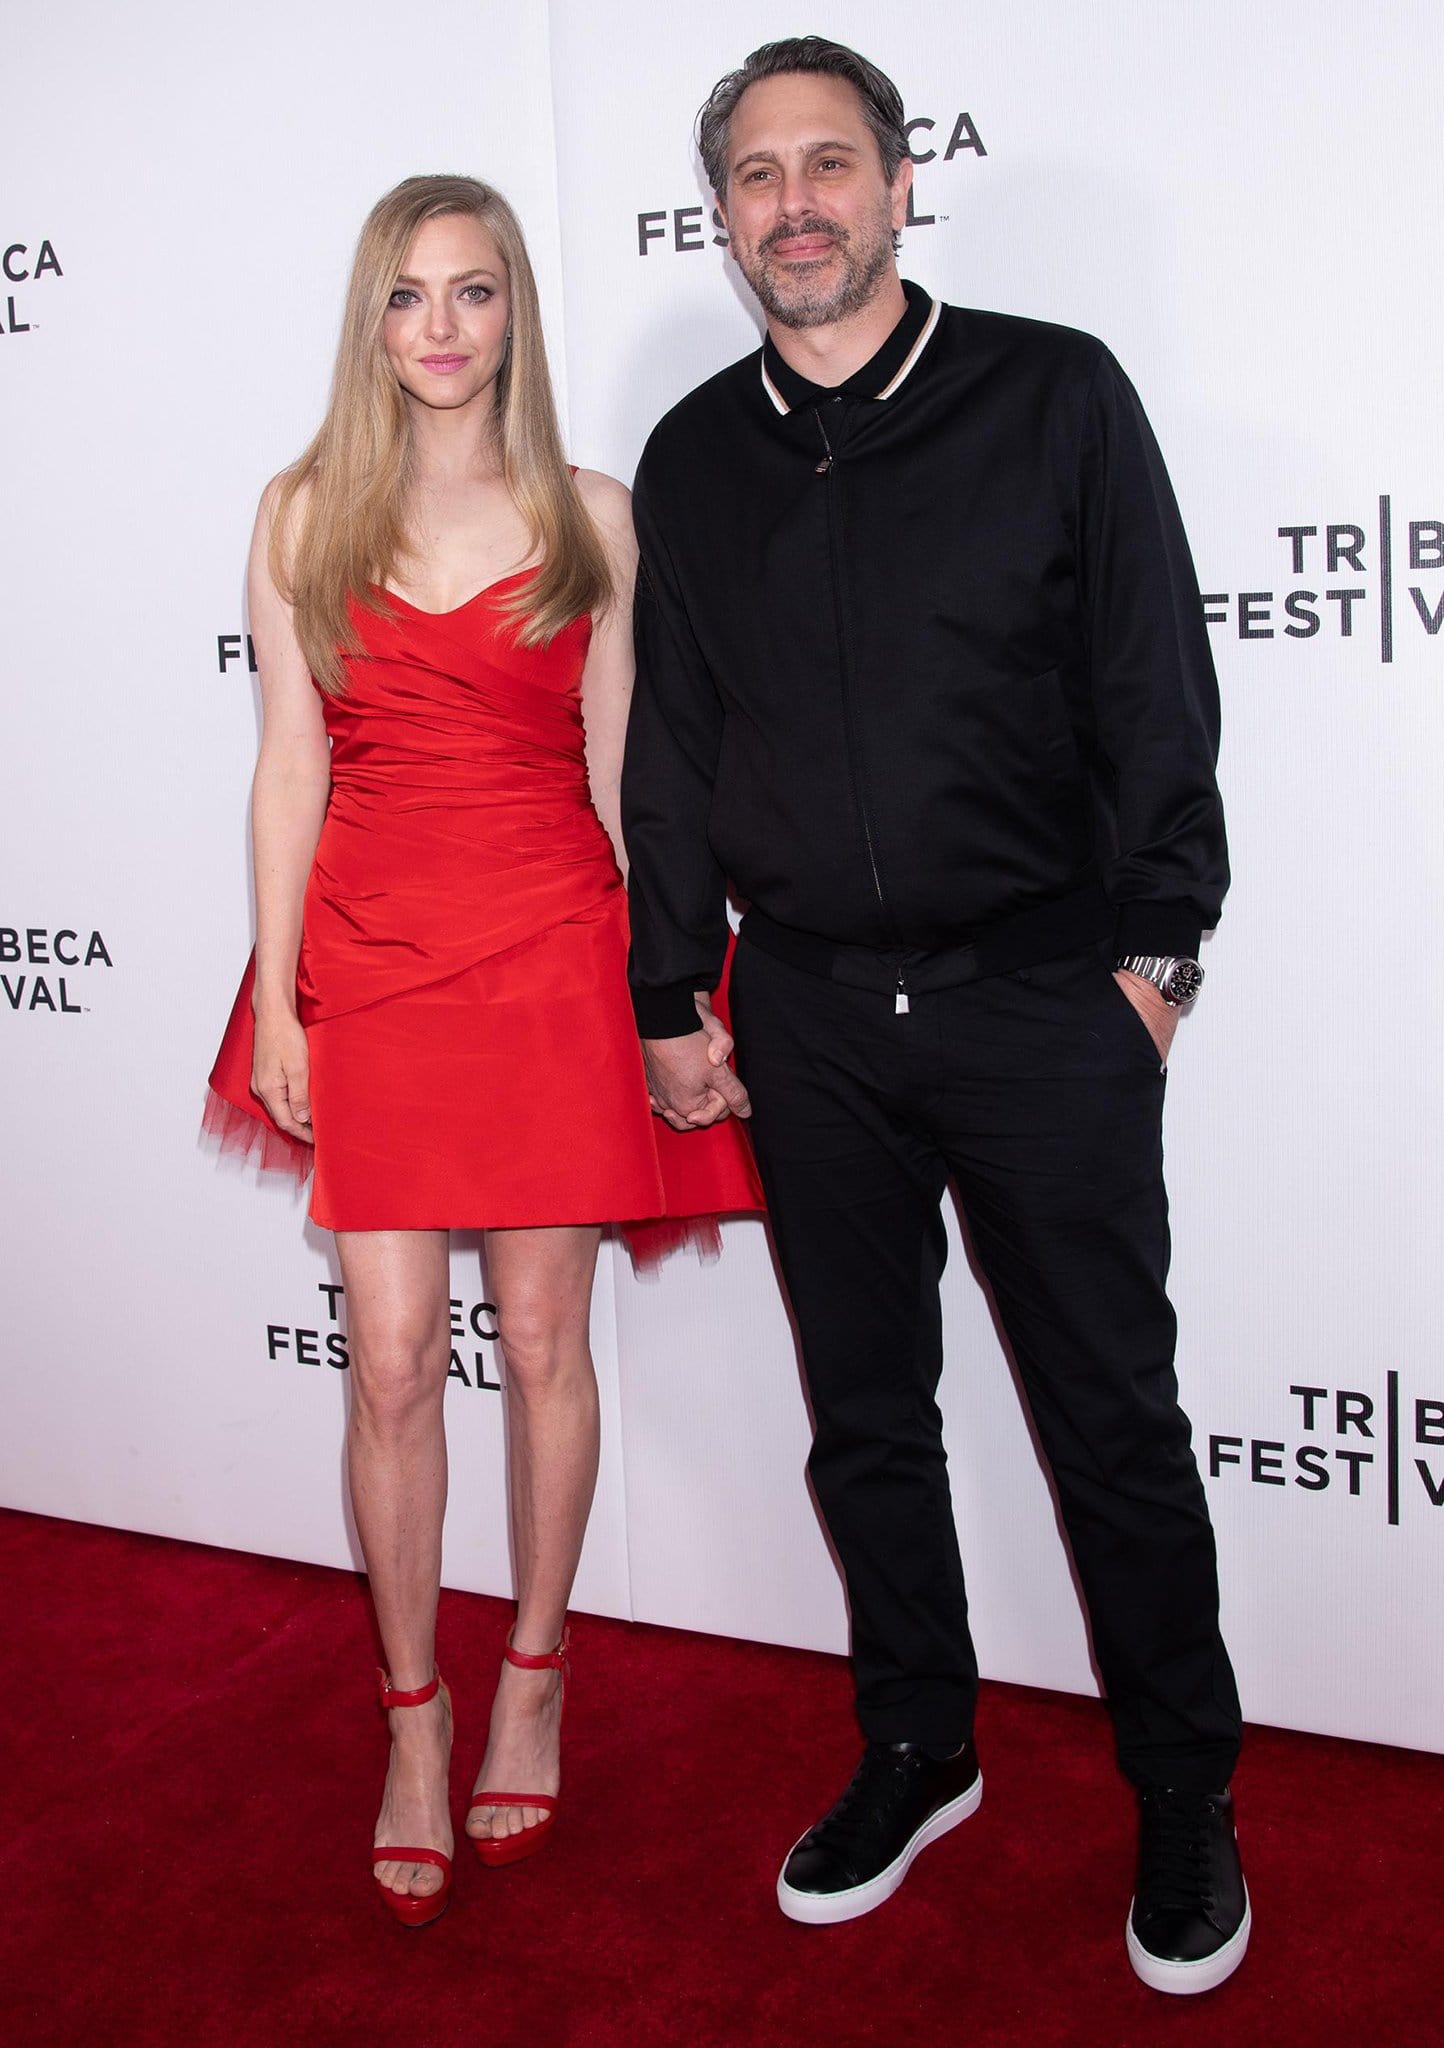 Amanda Seyfried shows support for her husband Thomas Sadoski at the premiere of his movie 88 during the Tribeca Film Festival on June 11, 2022